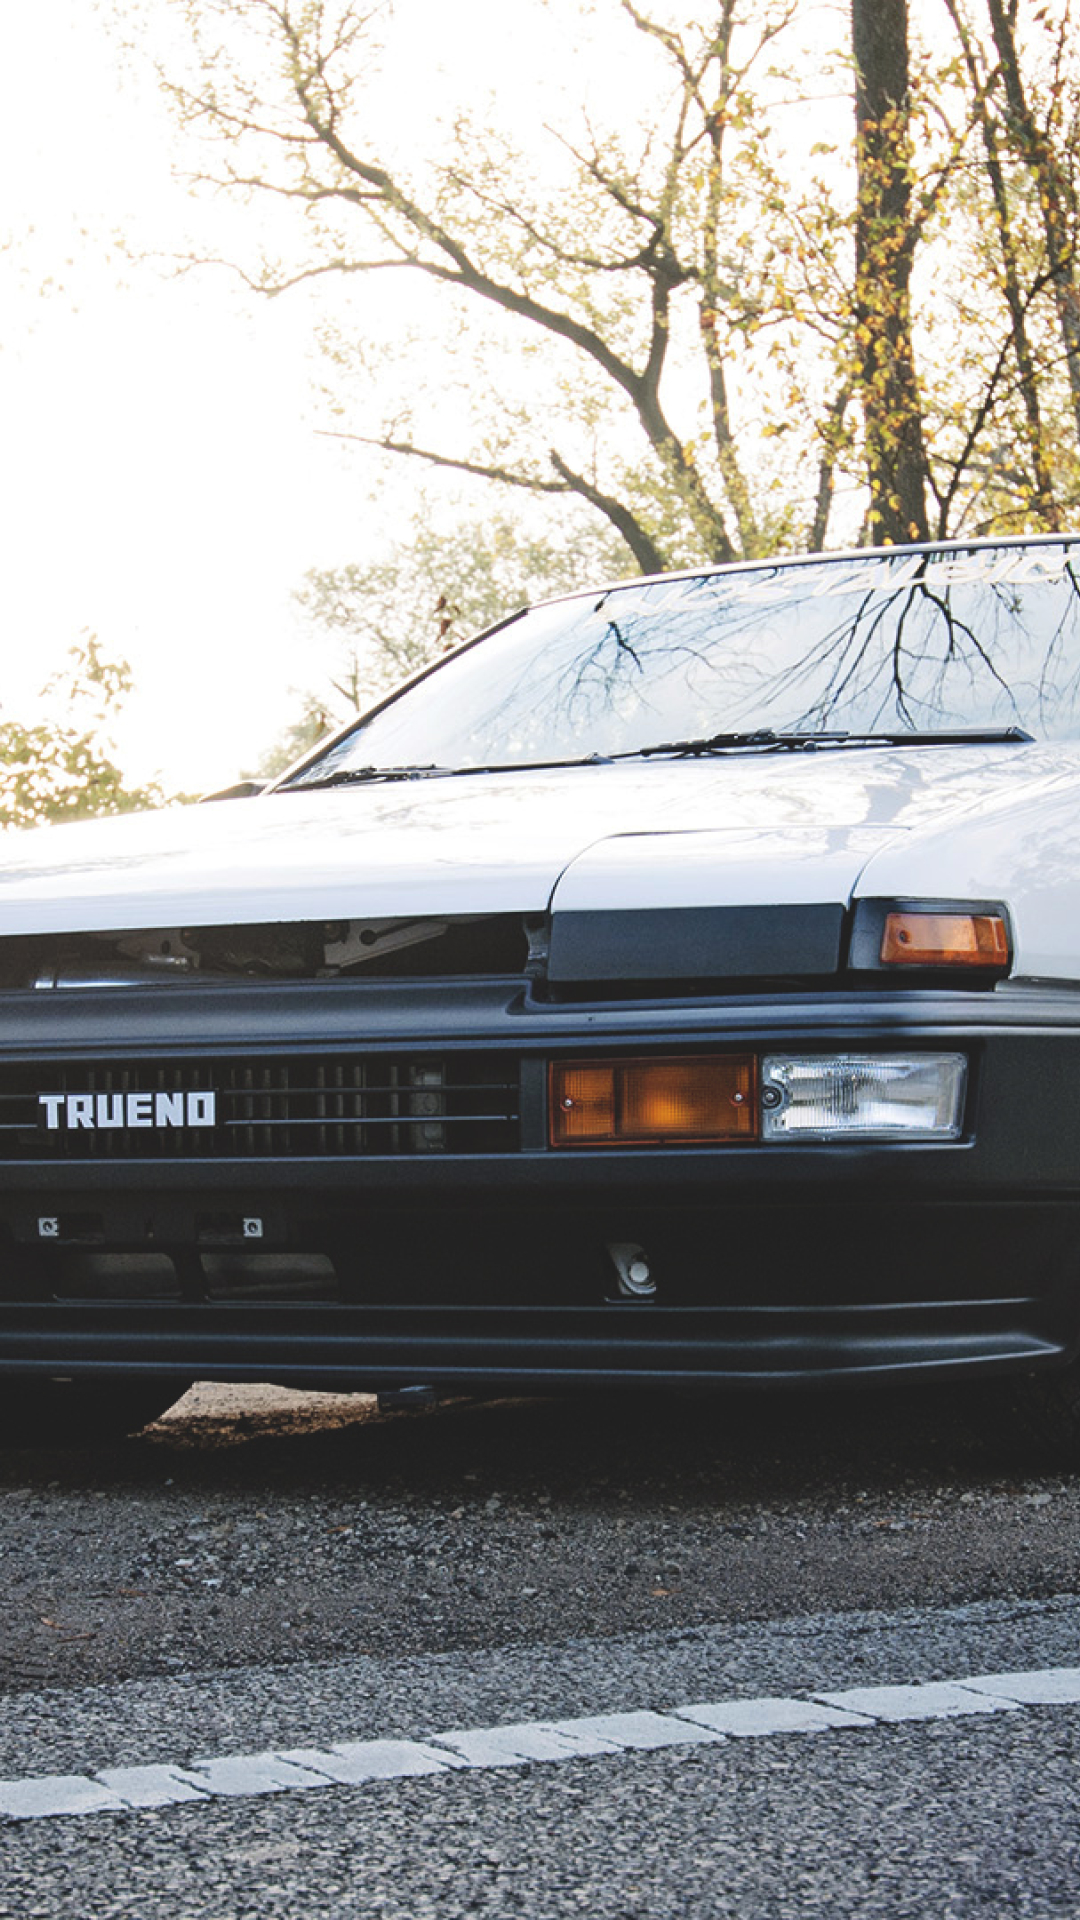 Toyota Ae86 Iphone Wallpapers Wallpaper Cave